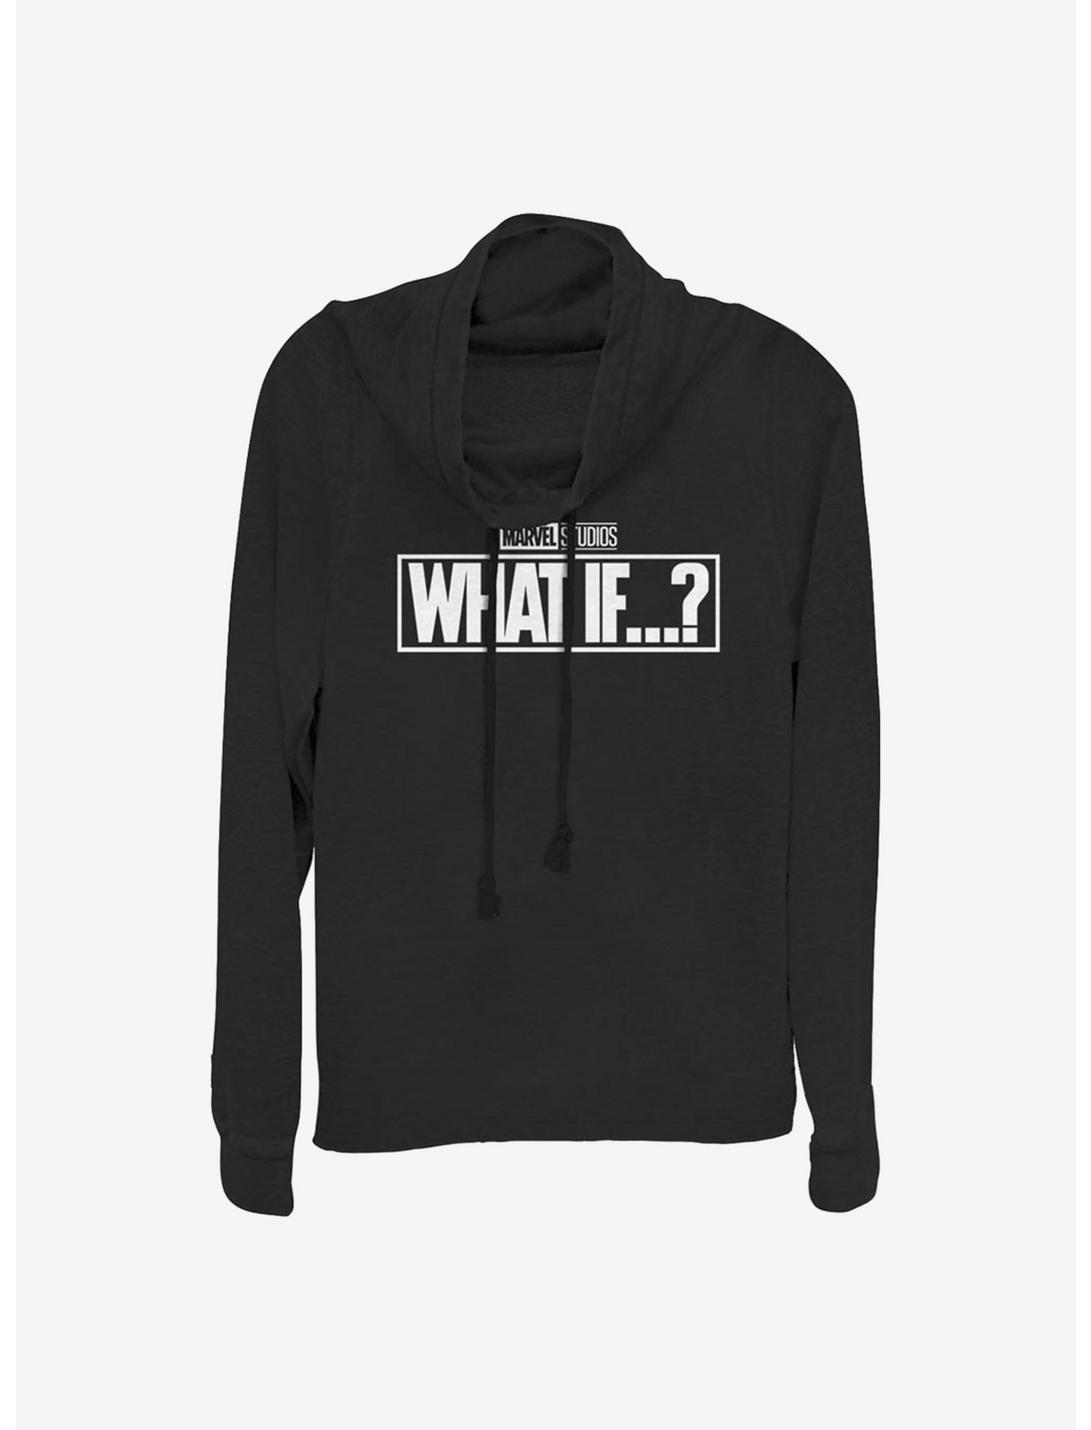 Marvel What If...? Black And White Cowlneck Long-Sleeve Girls Top, BLACK, hi-res